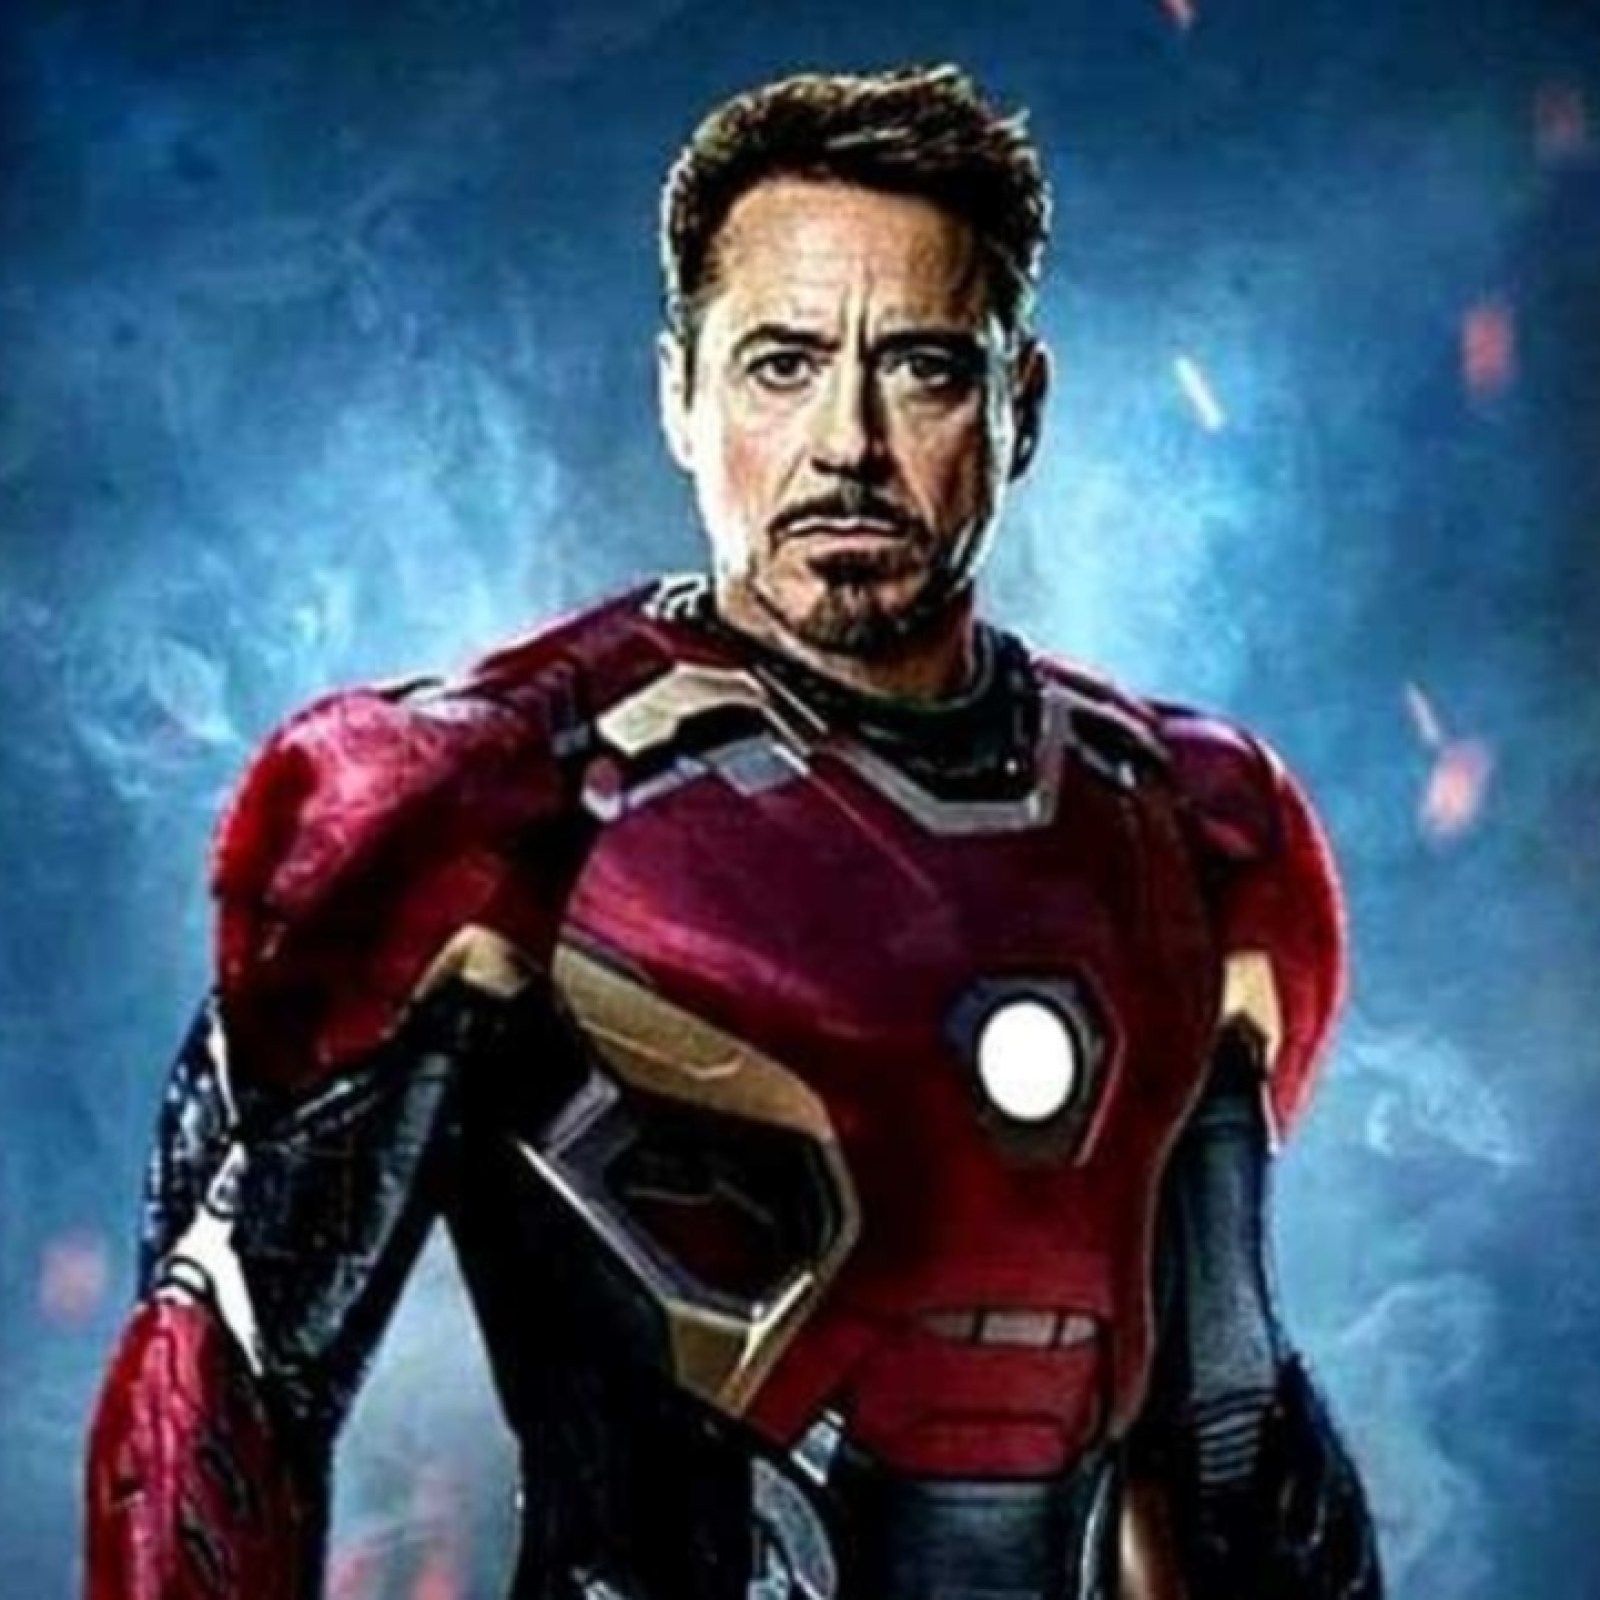 Why Tony Stark Is Not Voiced By Robert Downey Jr. On 'What If'